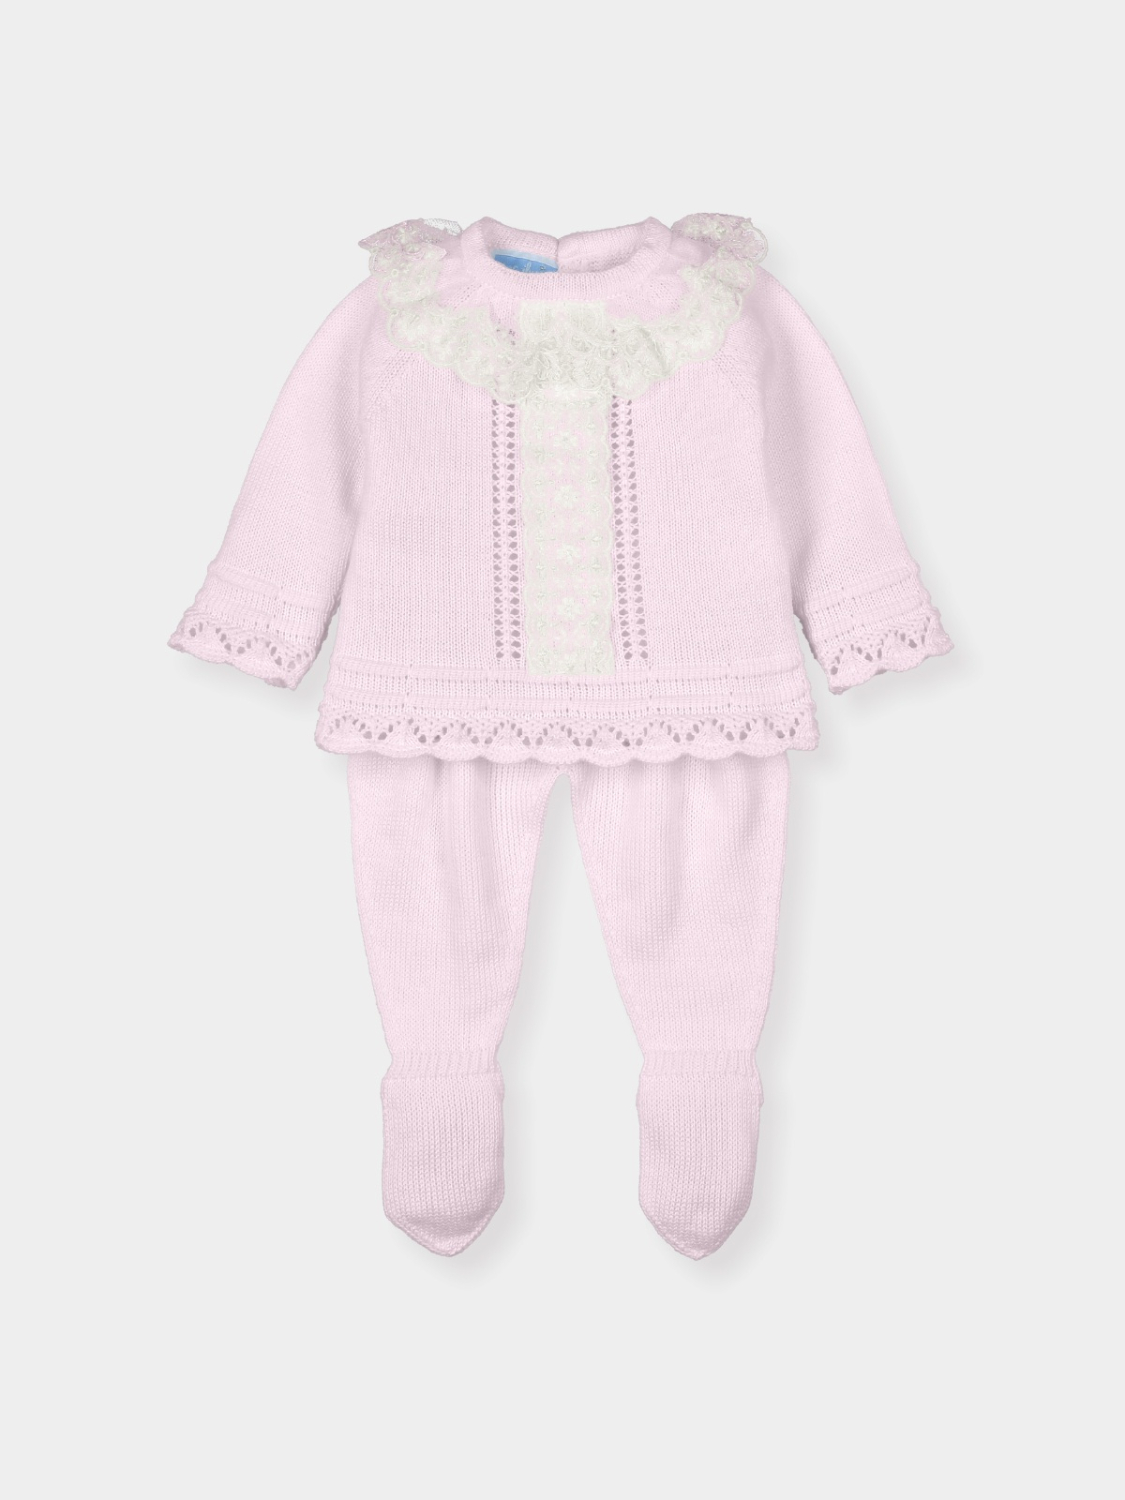 Pink Romantic  baby outfit 